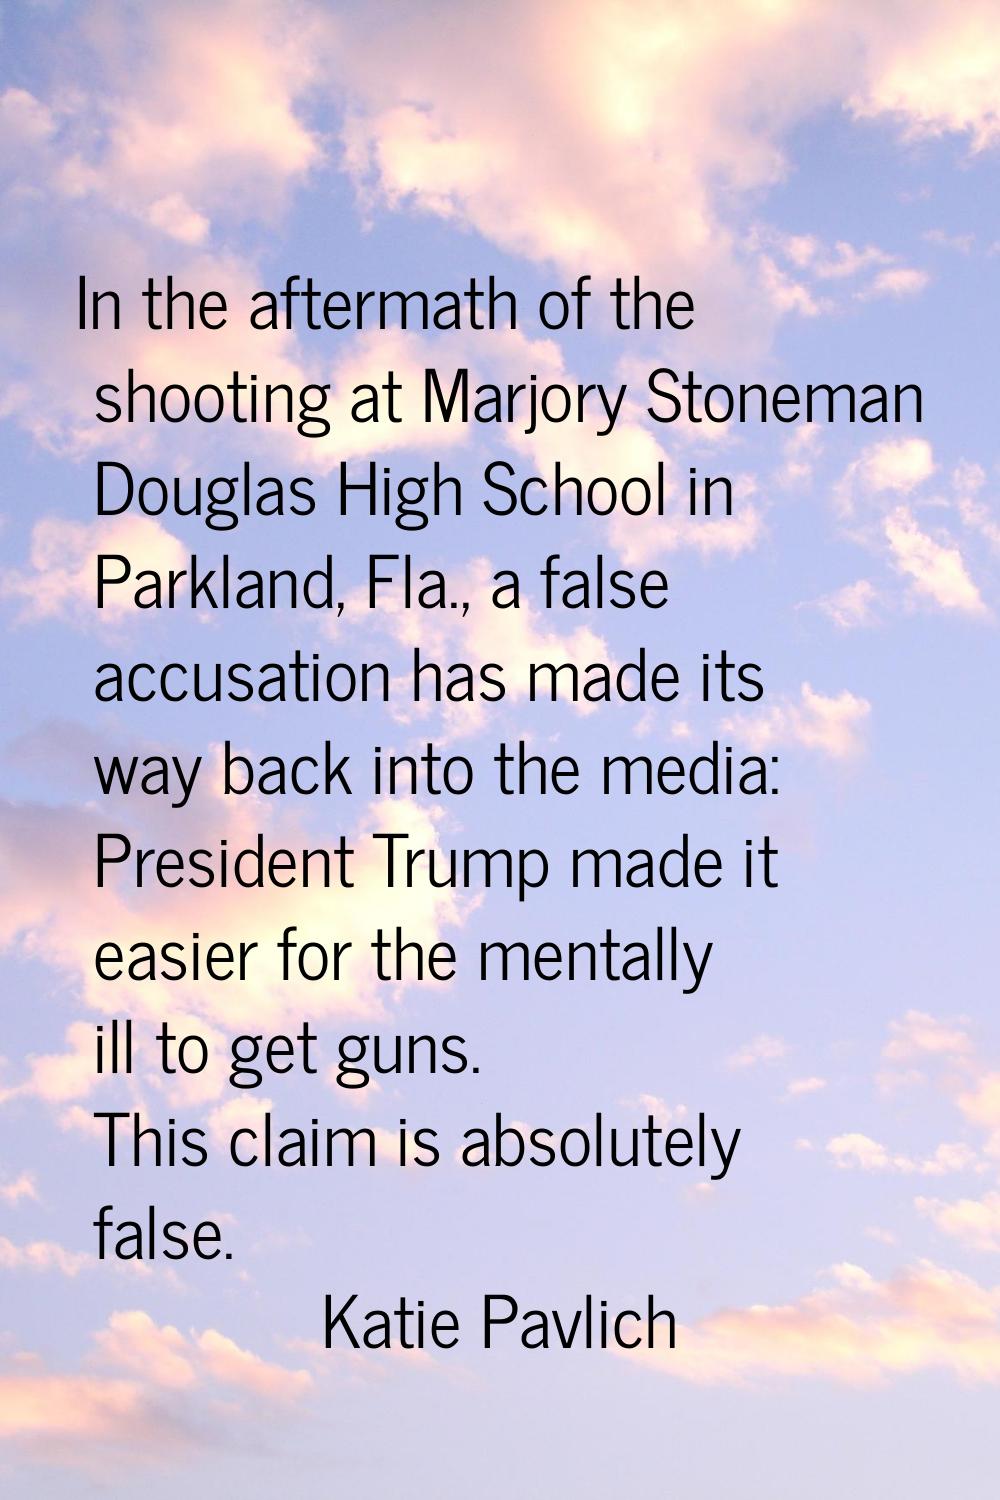 In the aftermath of the shooting at Marjory Stoneman Douglas High School in Parkland, Fla., a false